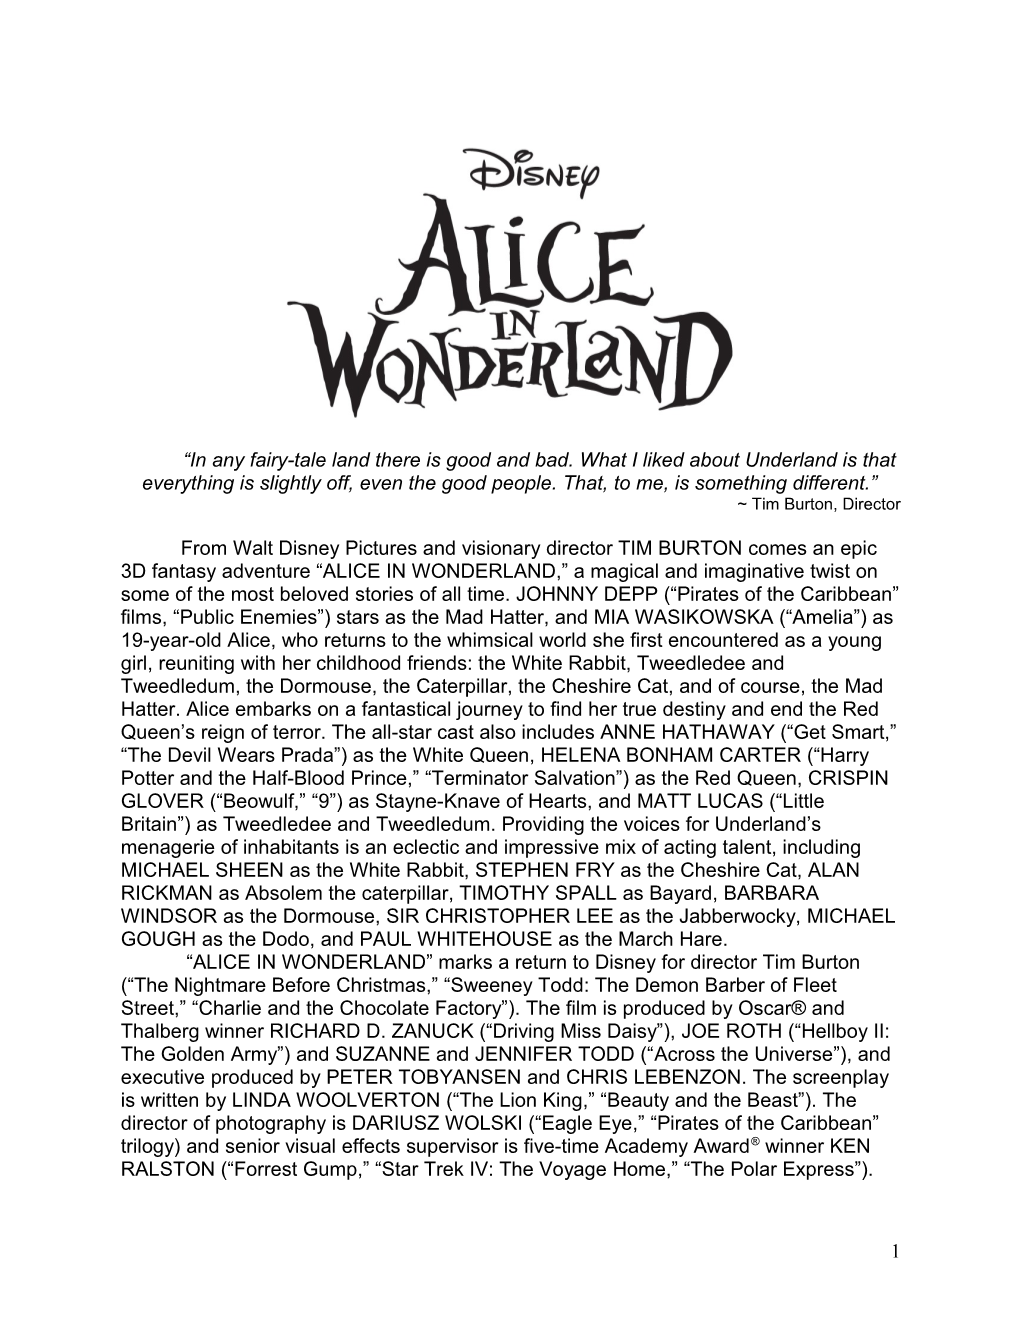 Alice in Wonderland Production Notes